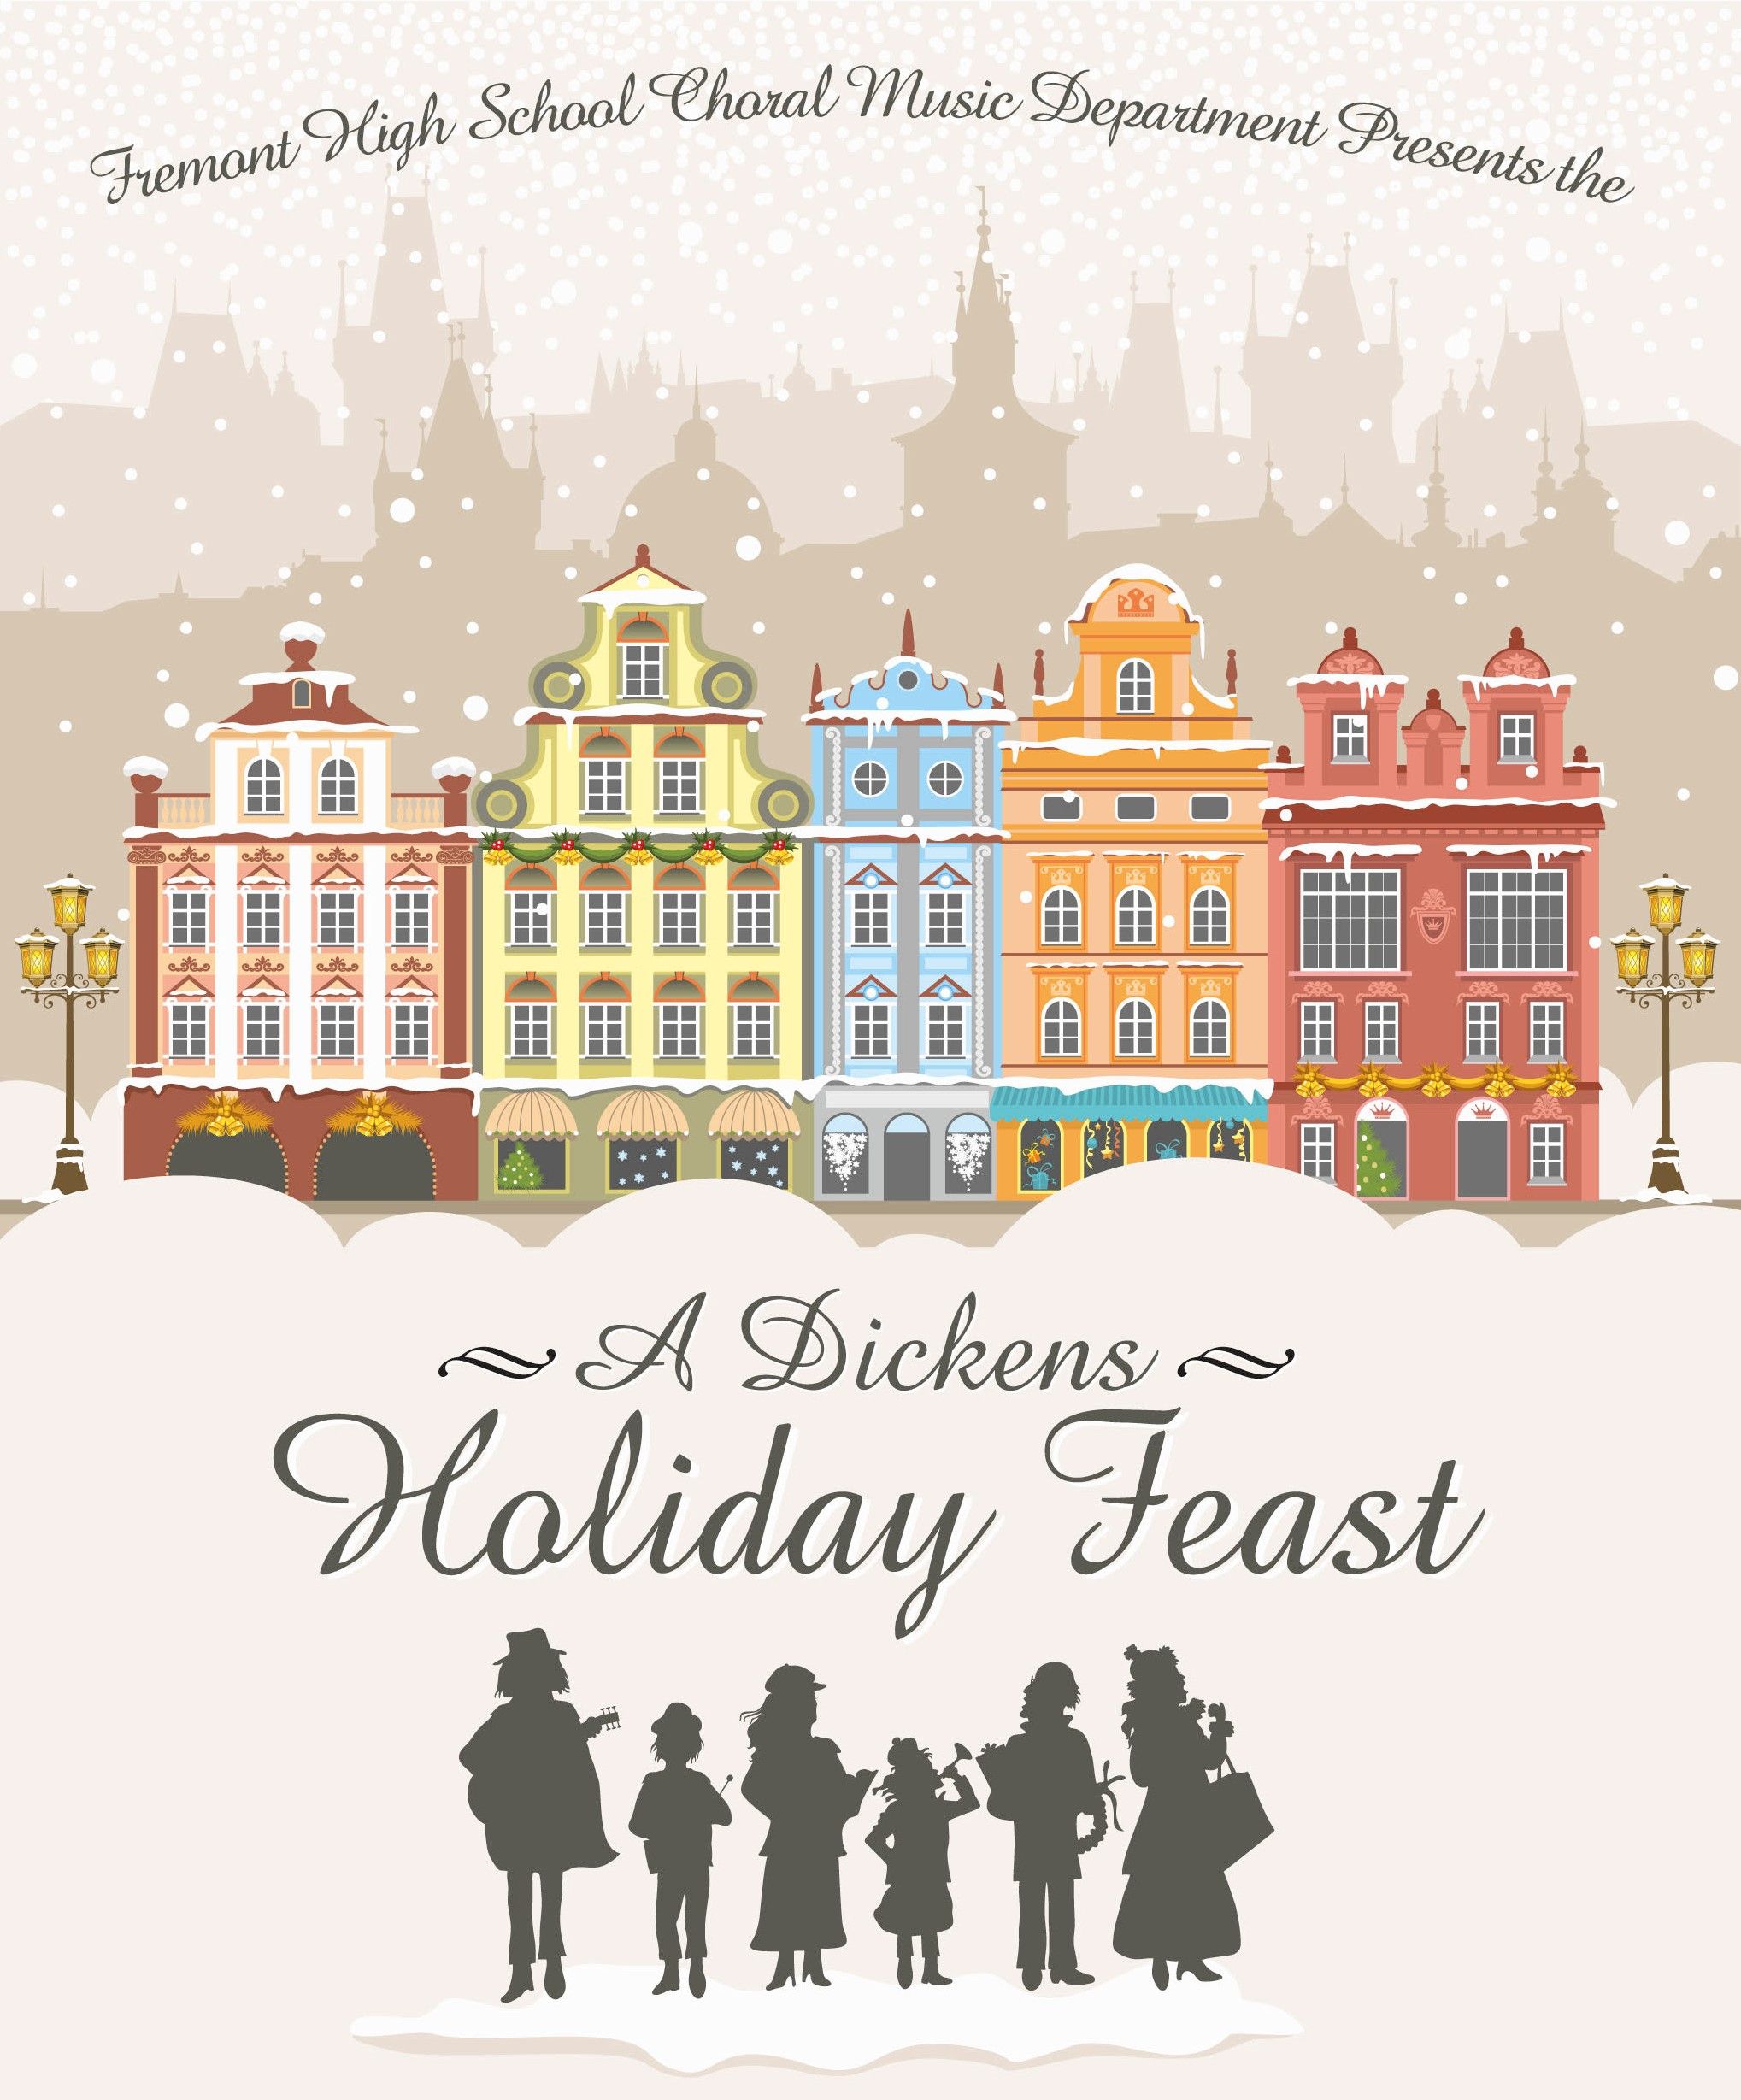 Fremont High School choral music department presents the: A Dickens Holiday Feast